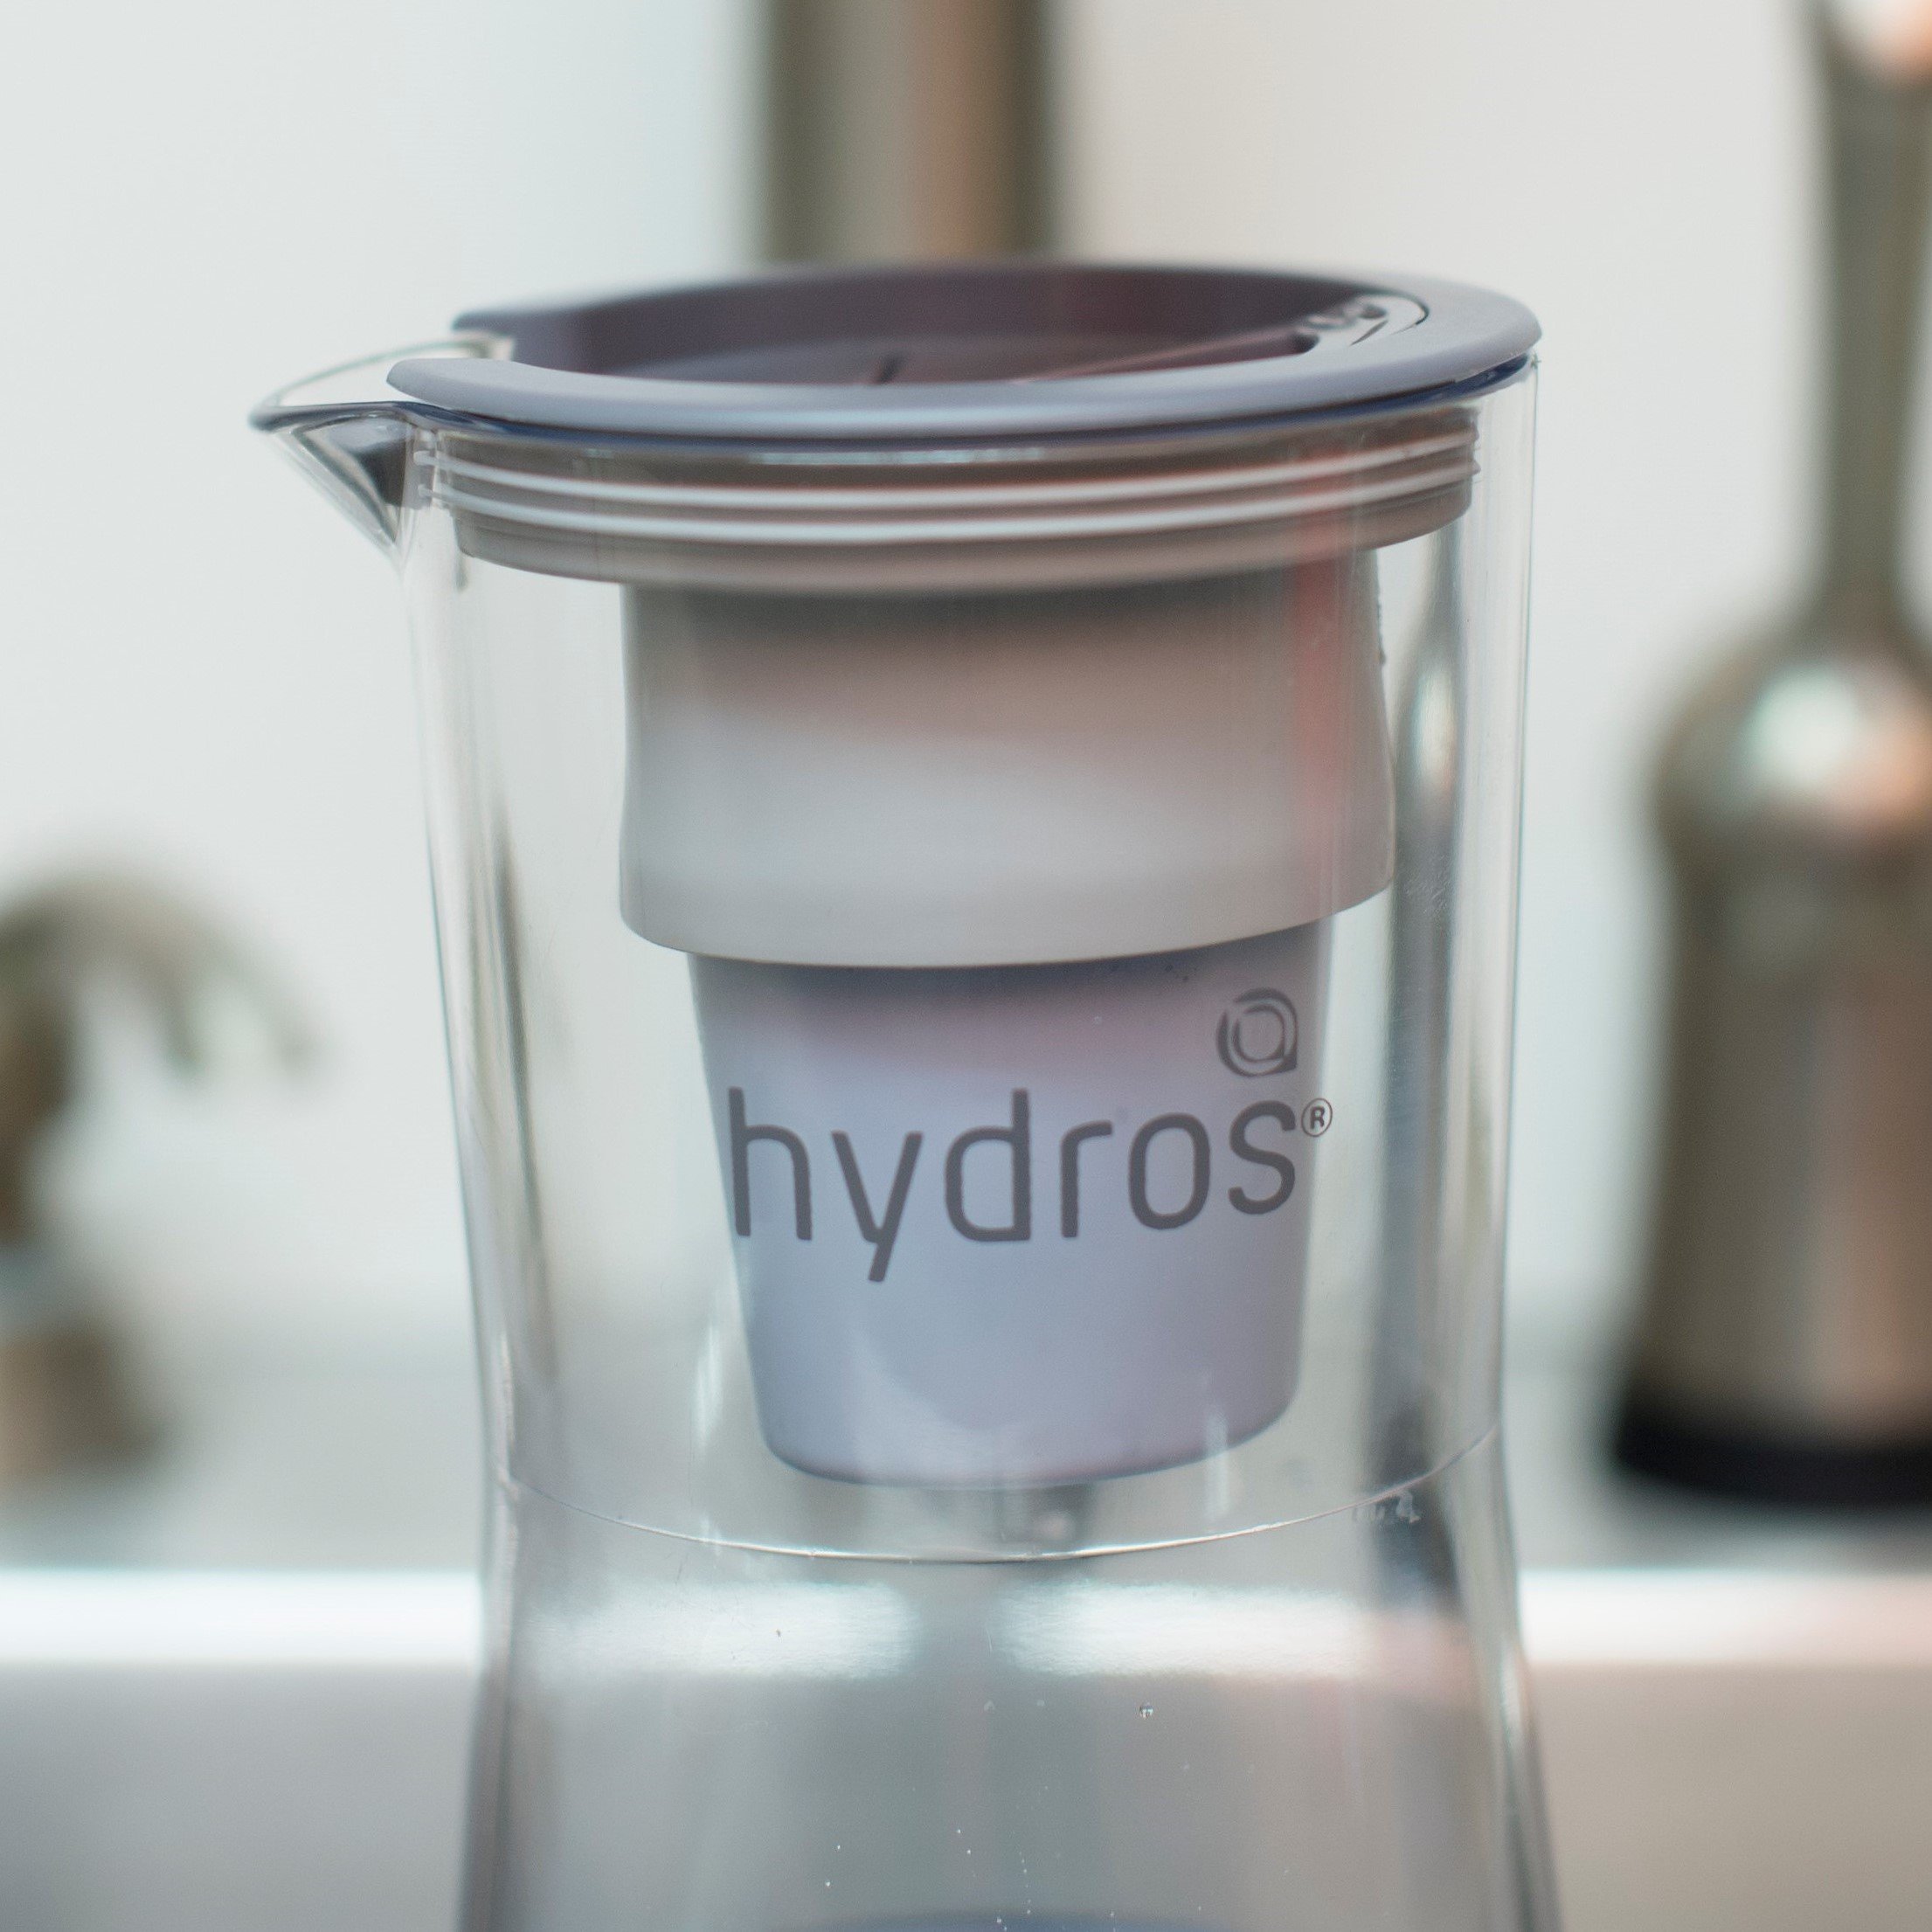 Hydros bottles share the same Fast-Flo water filter